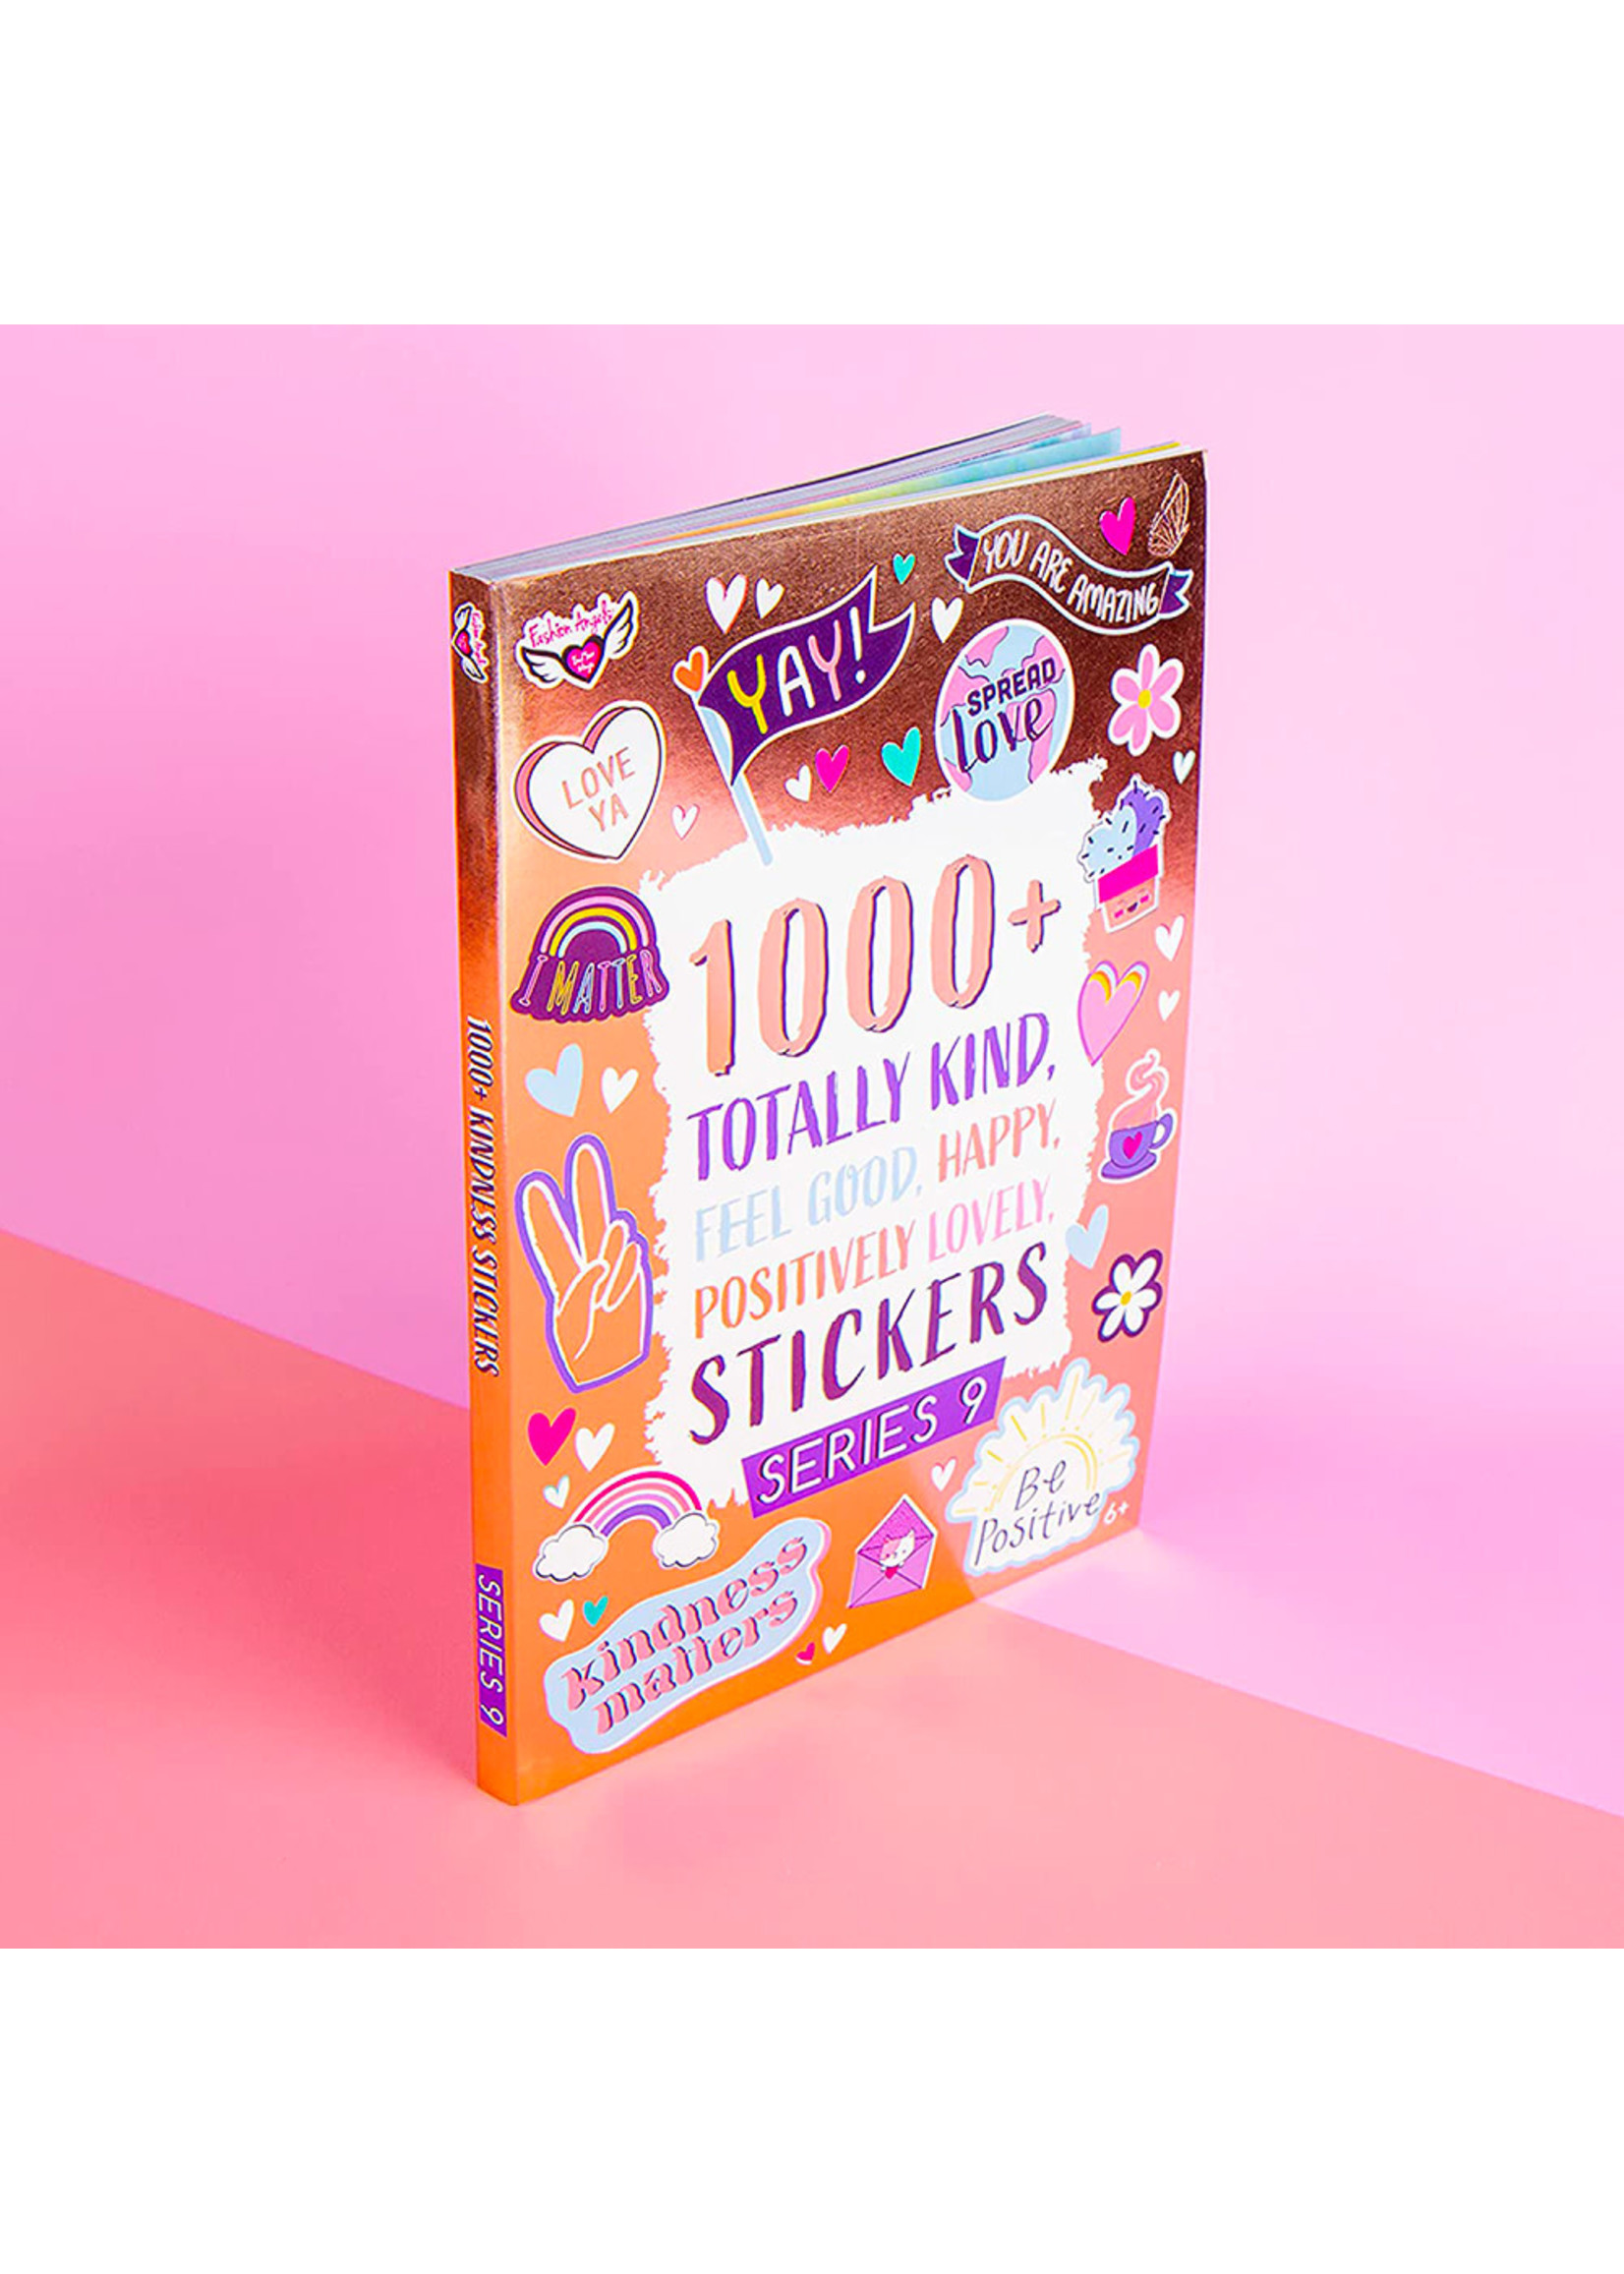 Fashion angels 1000+ totally kind, feel good, happy, positively lovely, stickers